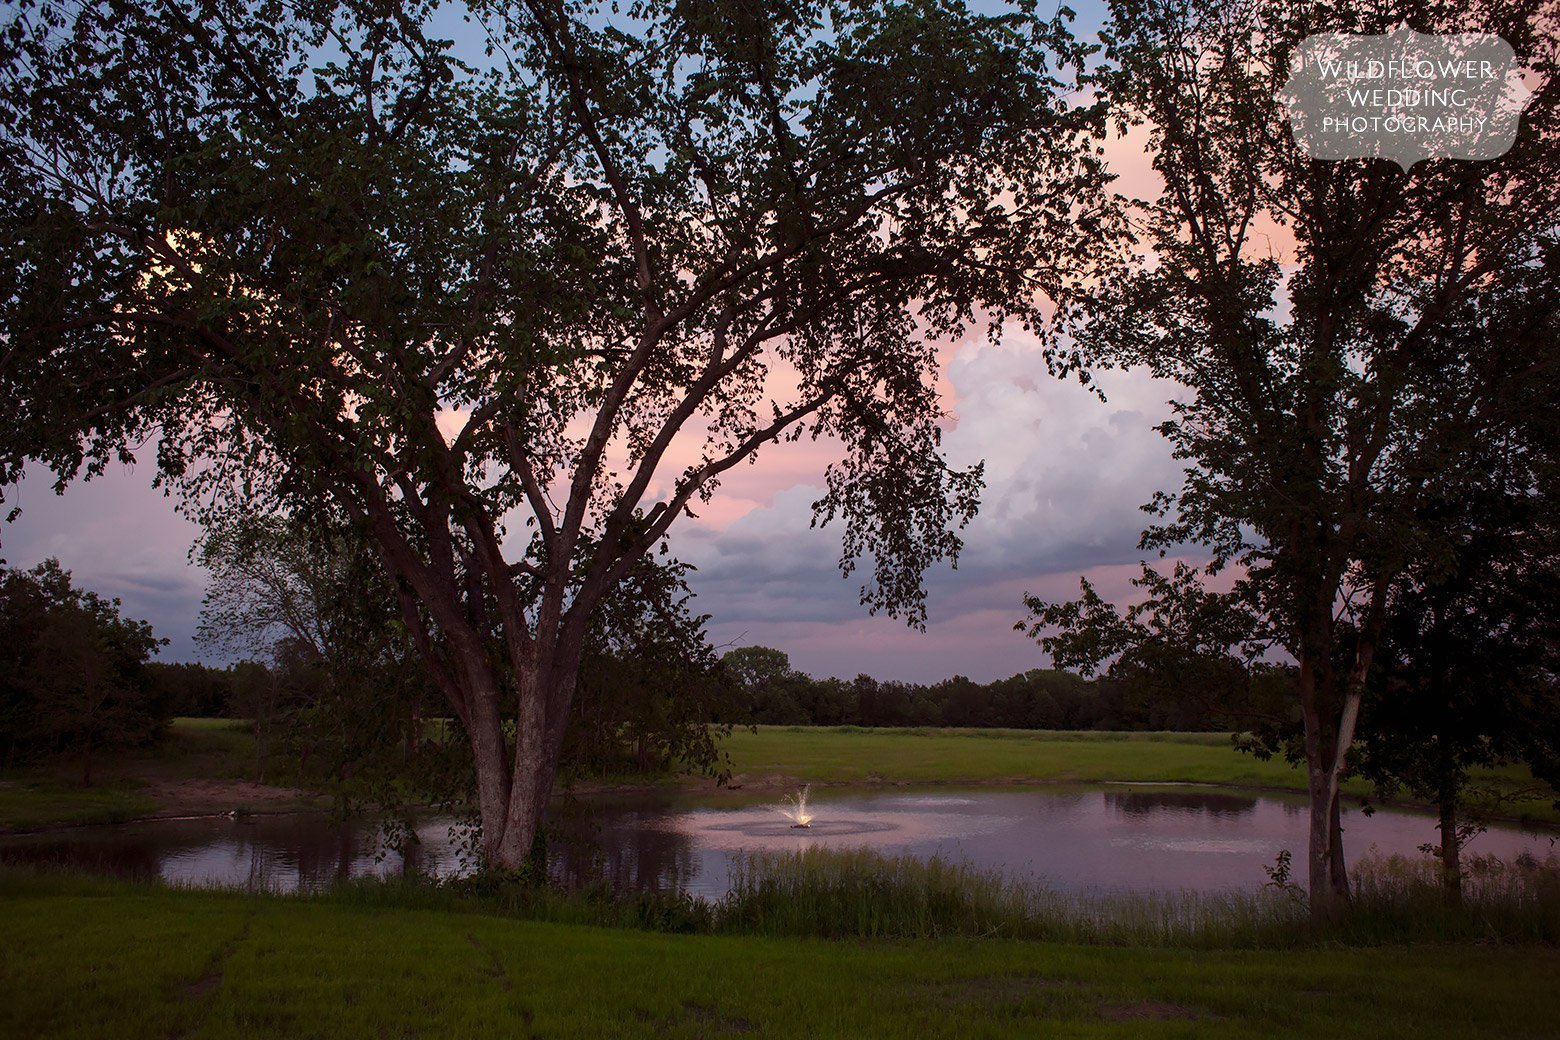 Dusk over the pond at Cooper's Ridge outdoor wedding venue in Boonville, MO.